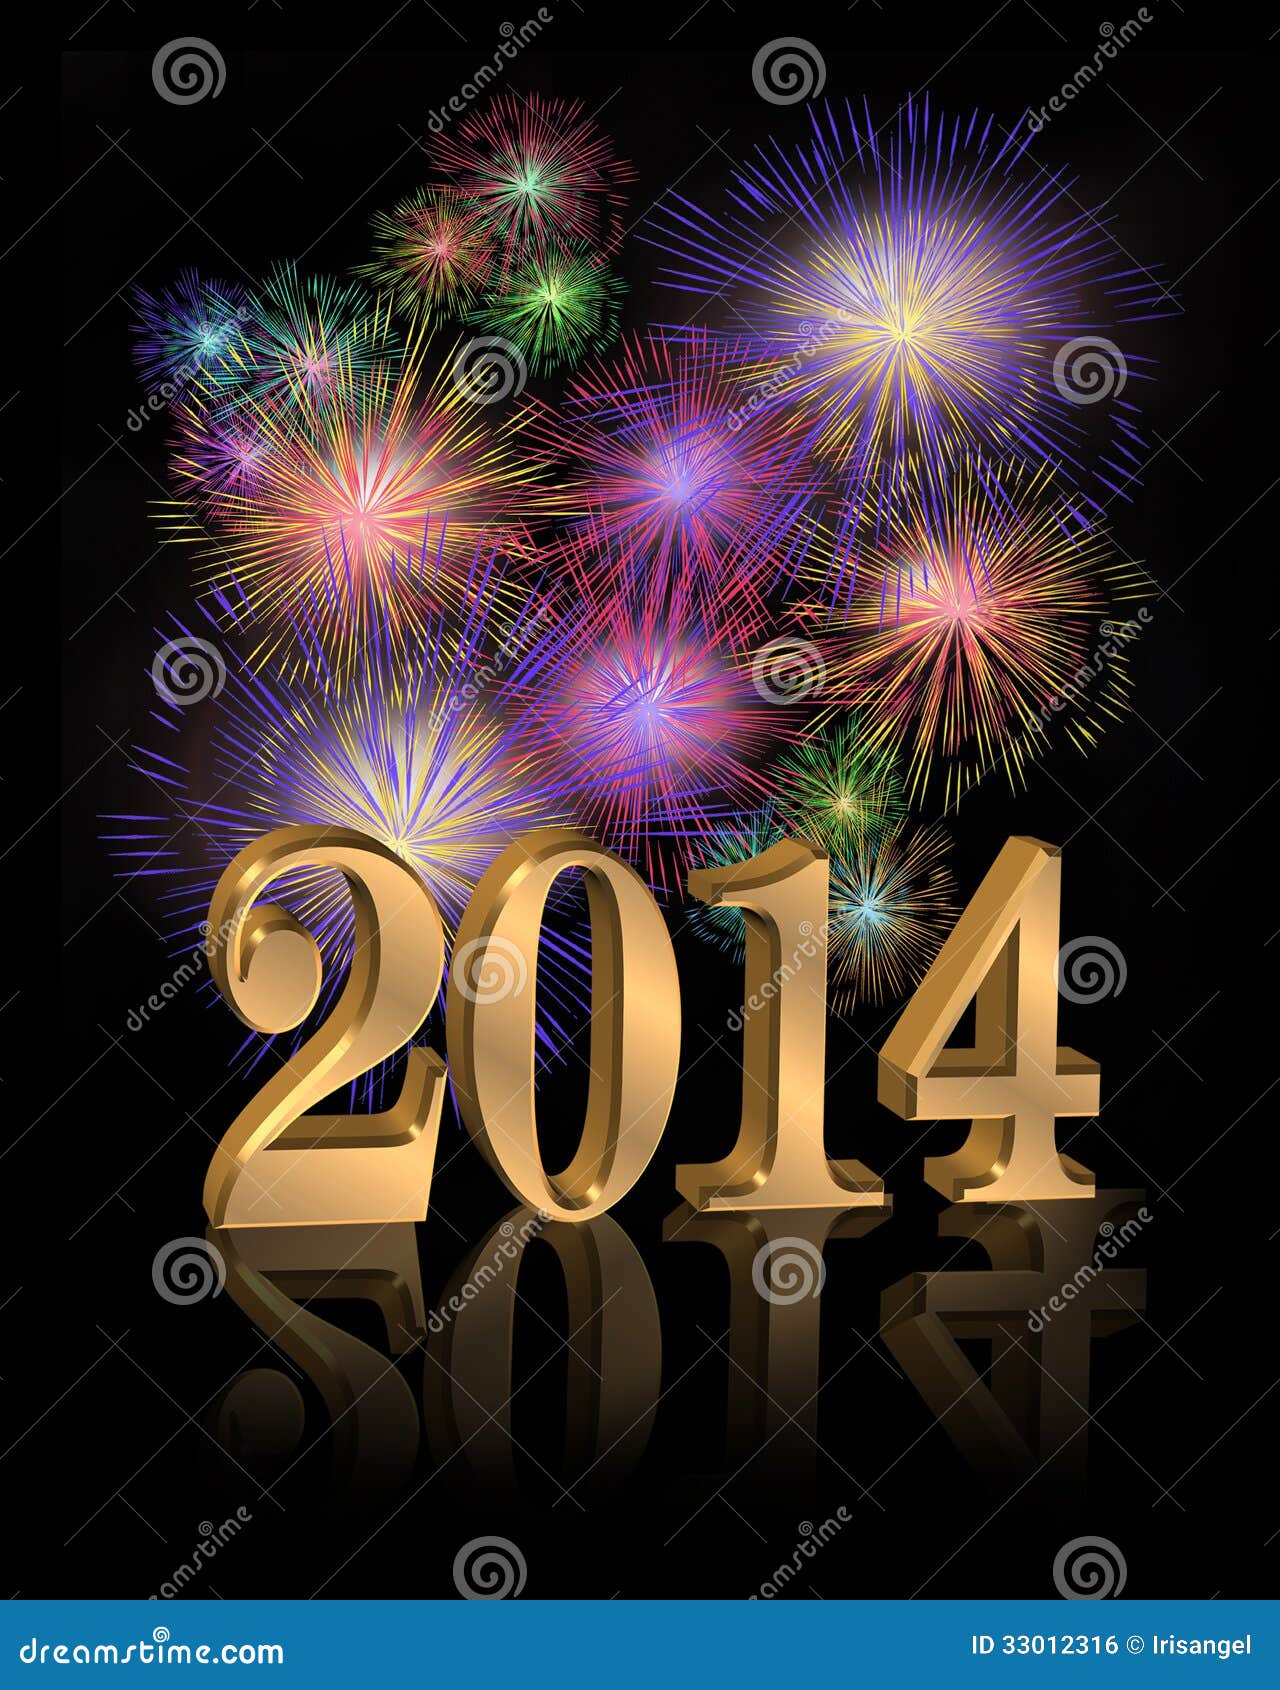 clipart new years eve 2014 - photo #23